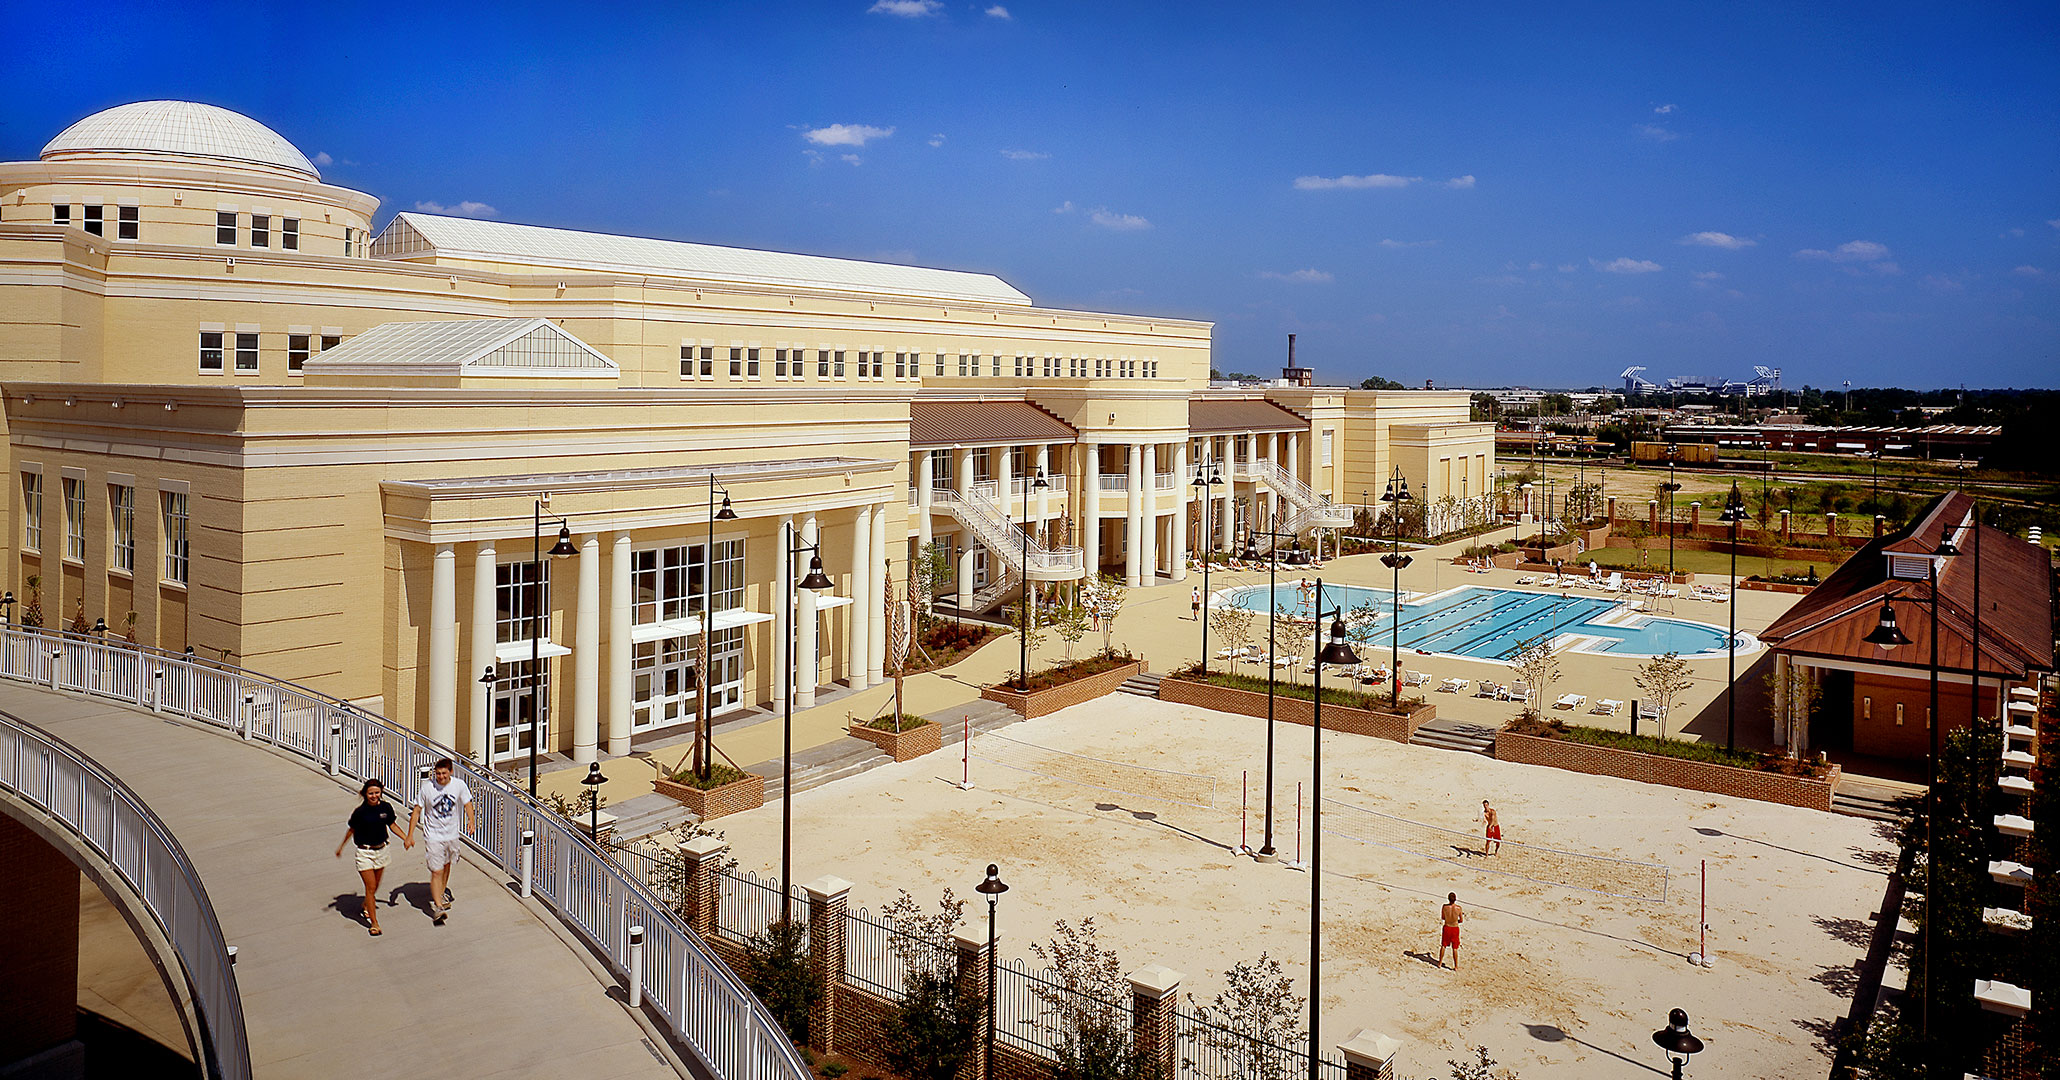 University of South Carolina worked with the most experienced architects in South Carolina Boudreaux to design the Strom Thurmond Wellness Center in downtown Columbia, SC.